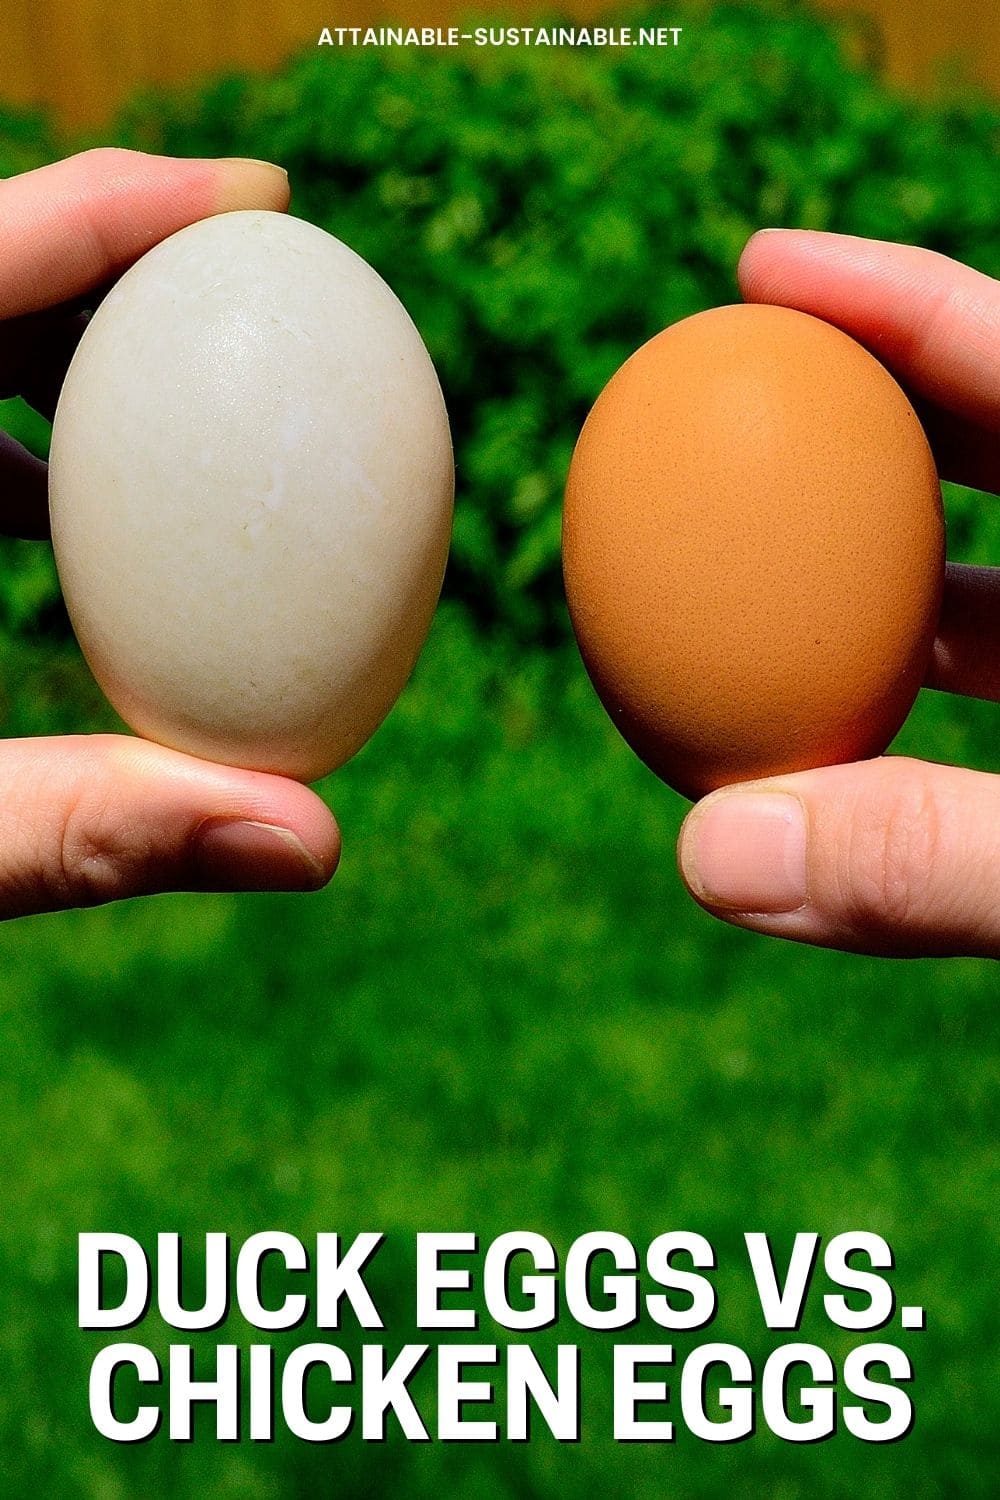 hands holding a white duck egg and a brown chicken egg side by side.